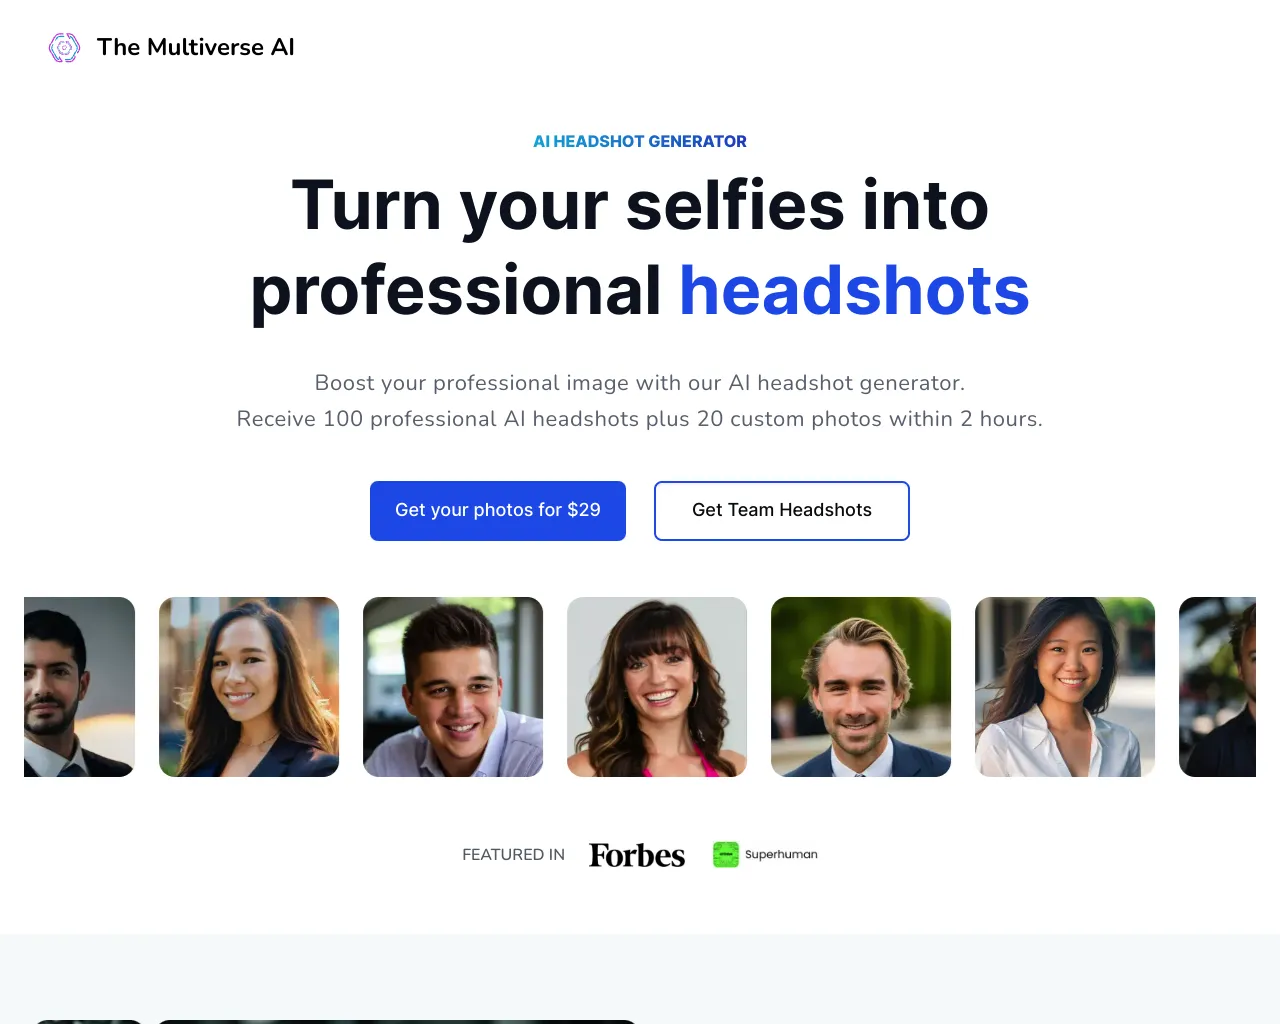 Turn your selfies into professional headshots